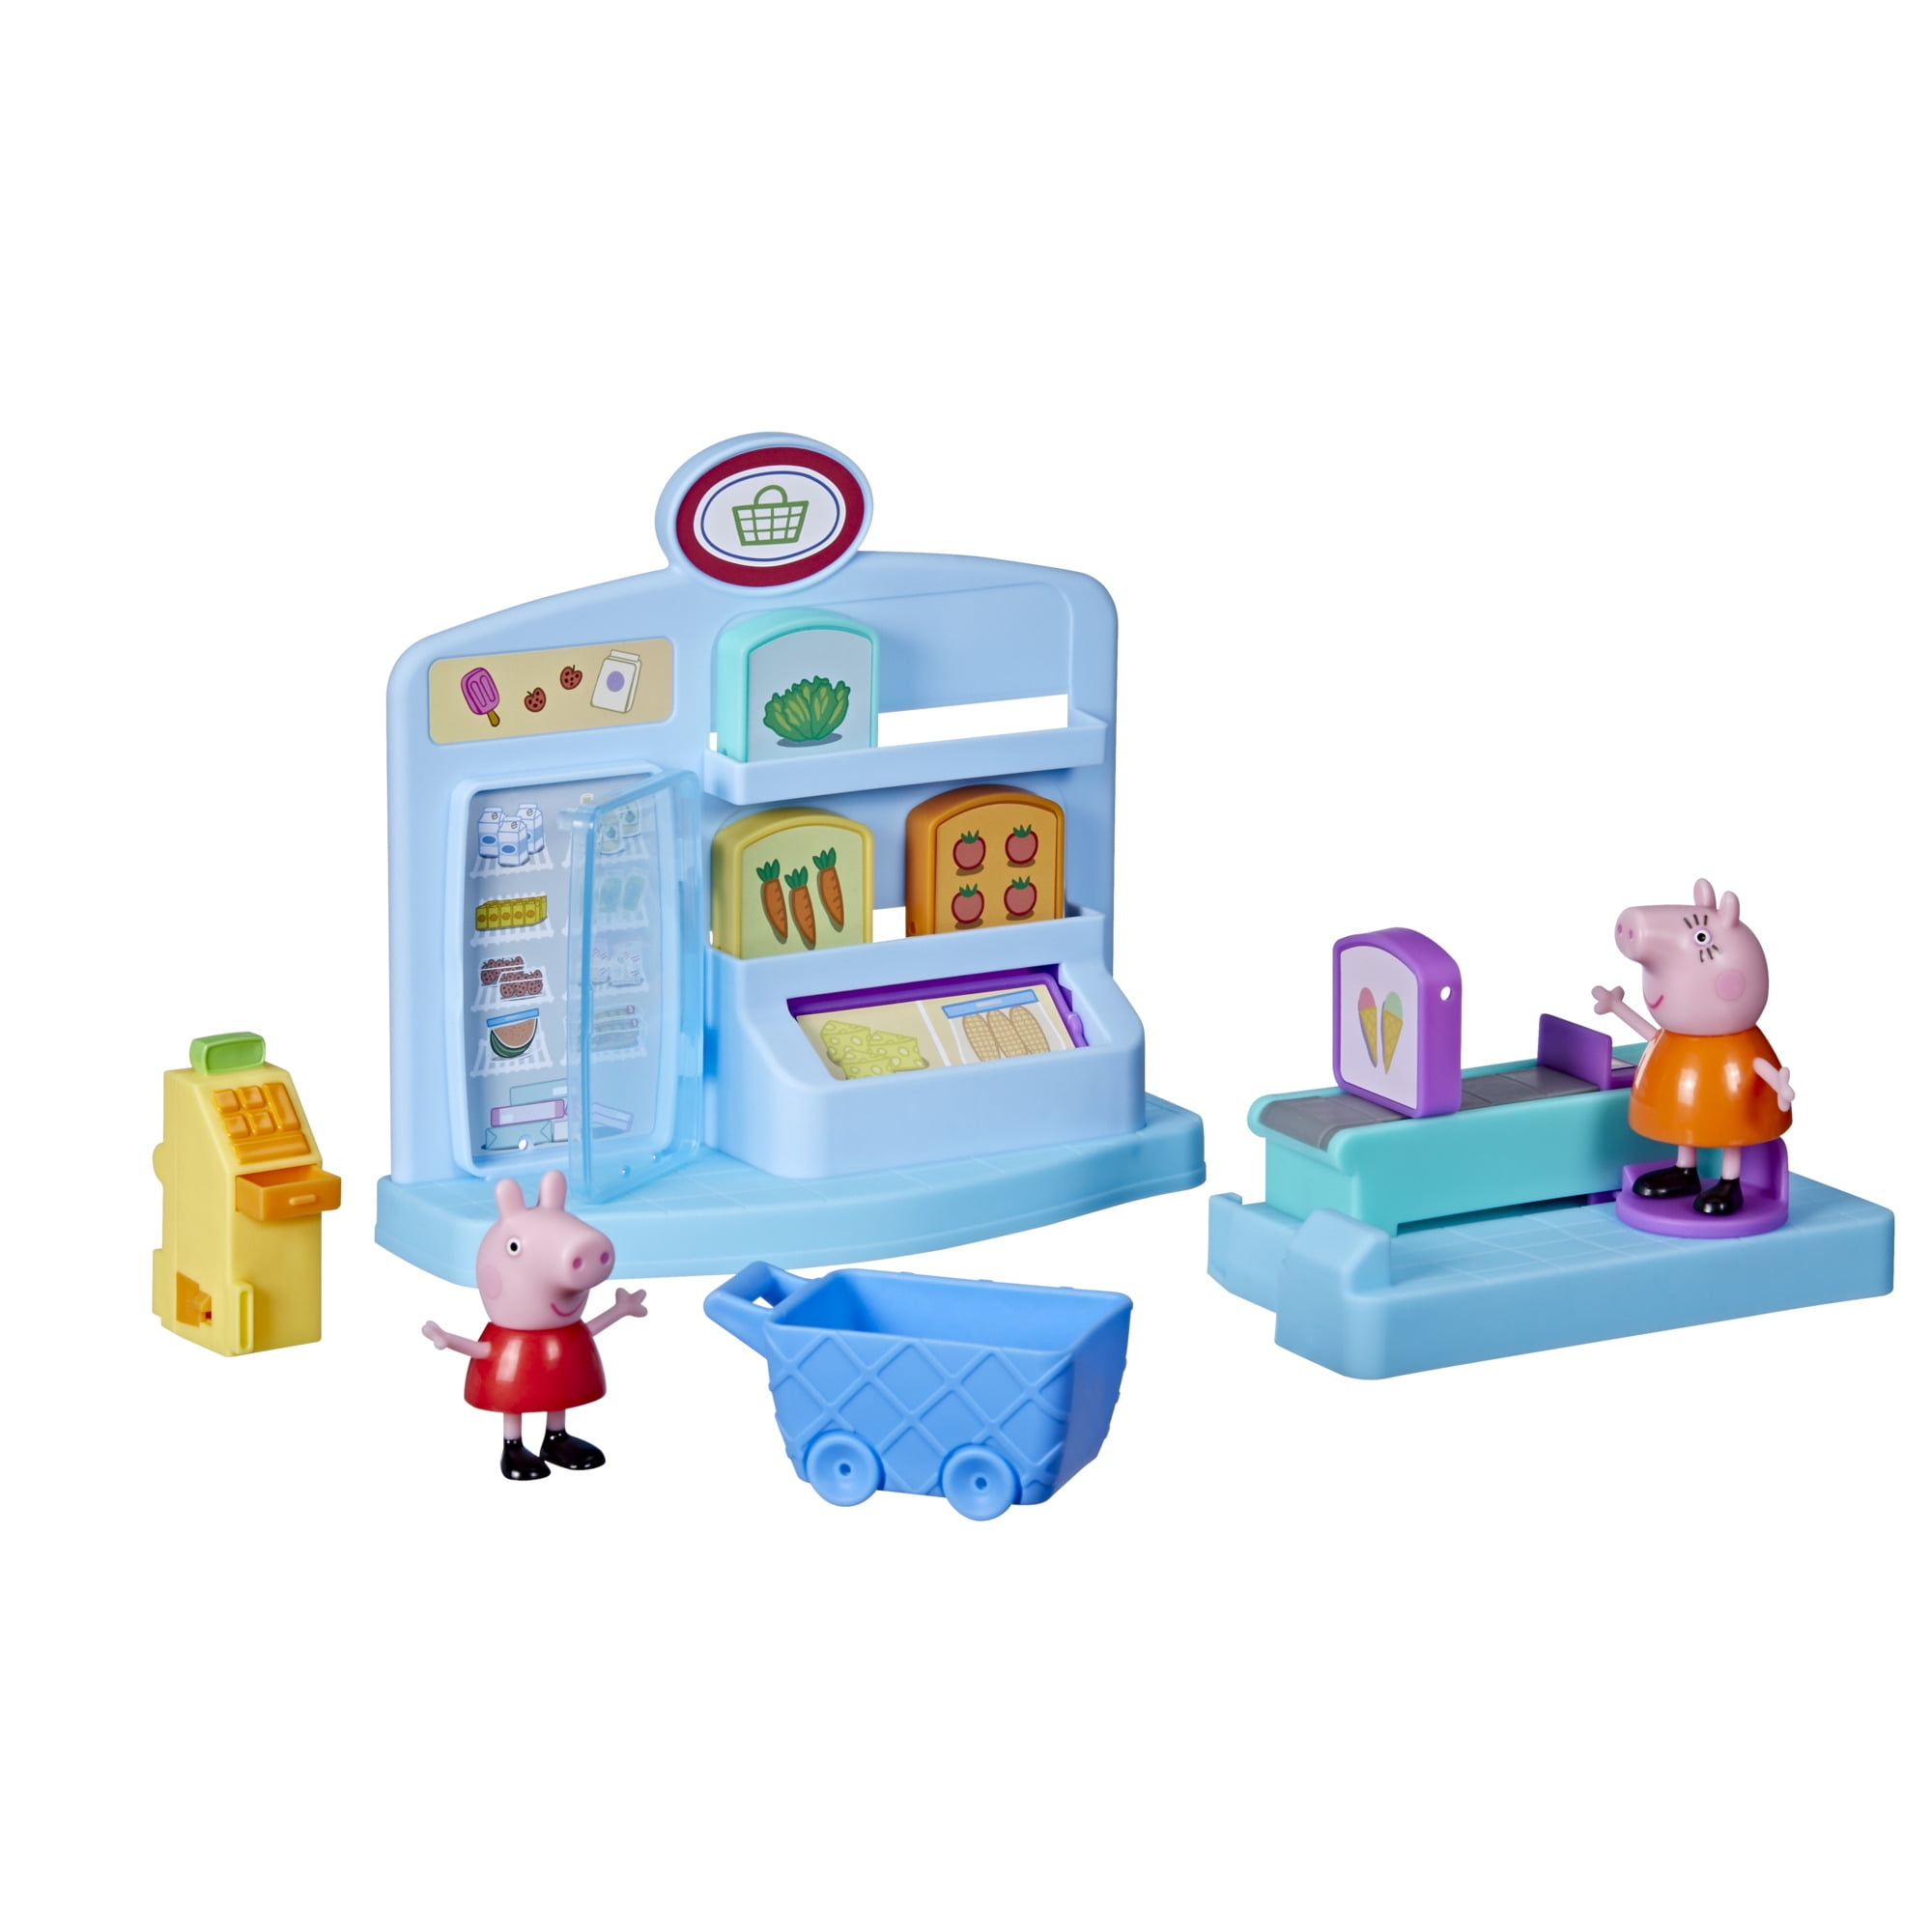 Peppa Pig Kitchen/Toys/Figures/Playsets Brand New & Boxed 